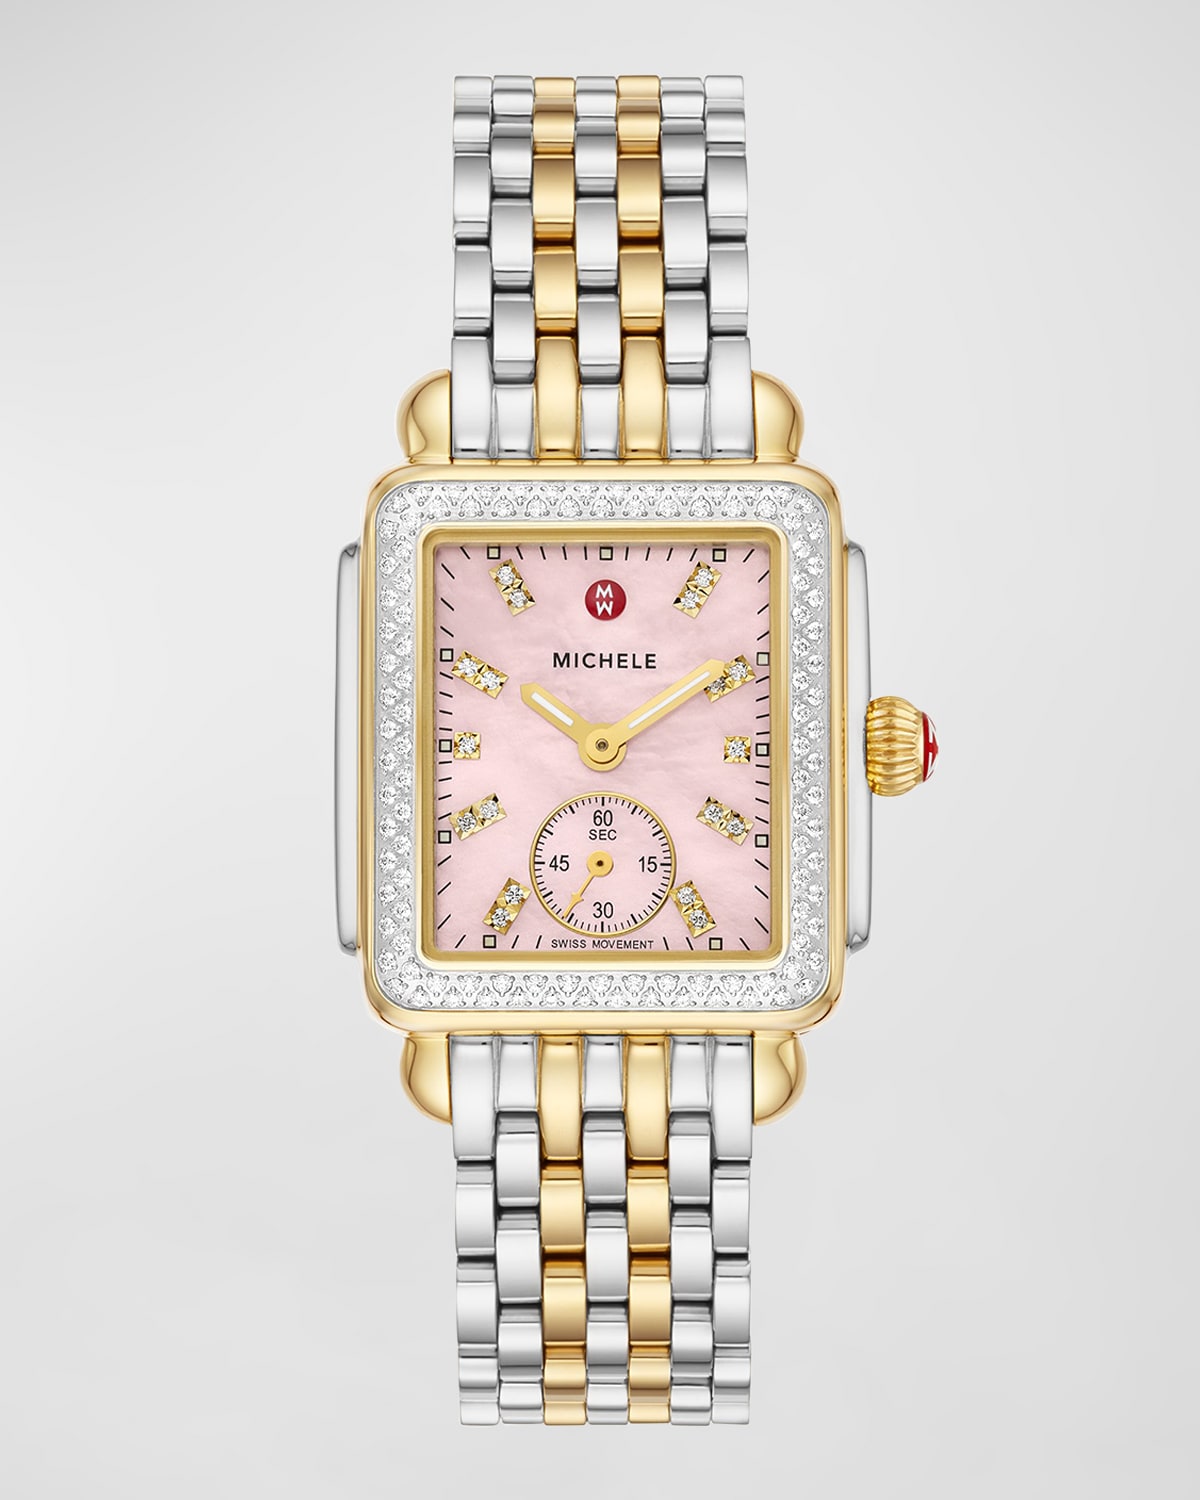 29mm Deco Mid Diamond Two-Tone Bracelet Watch in Country Rose